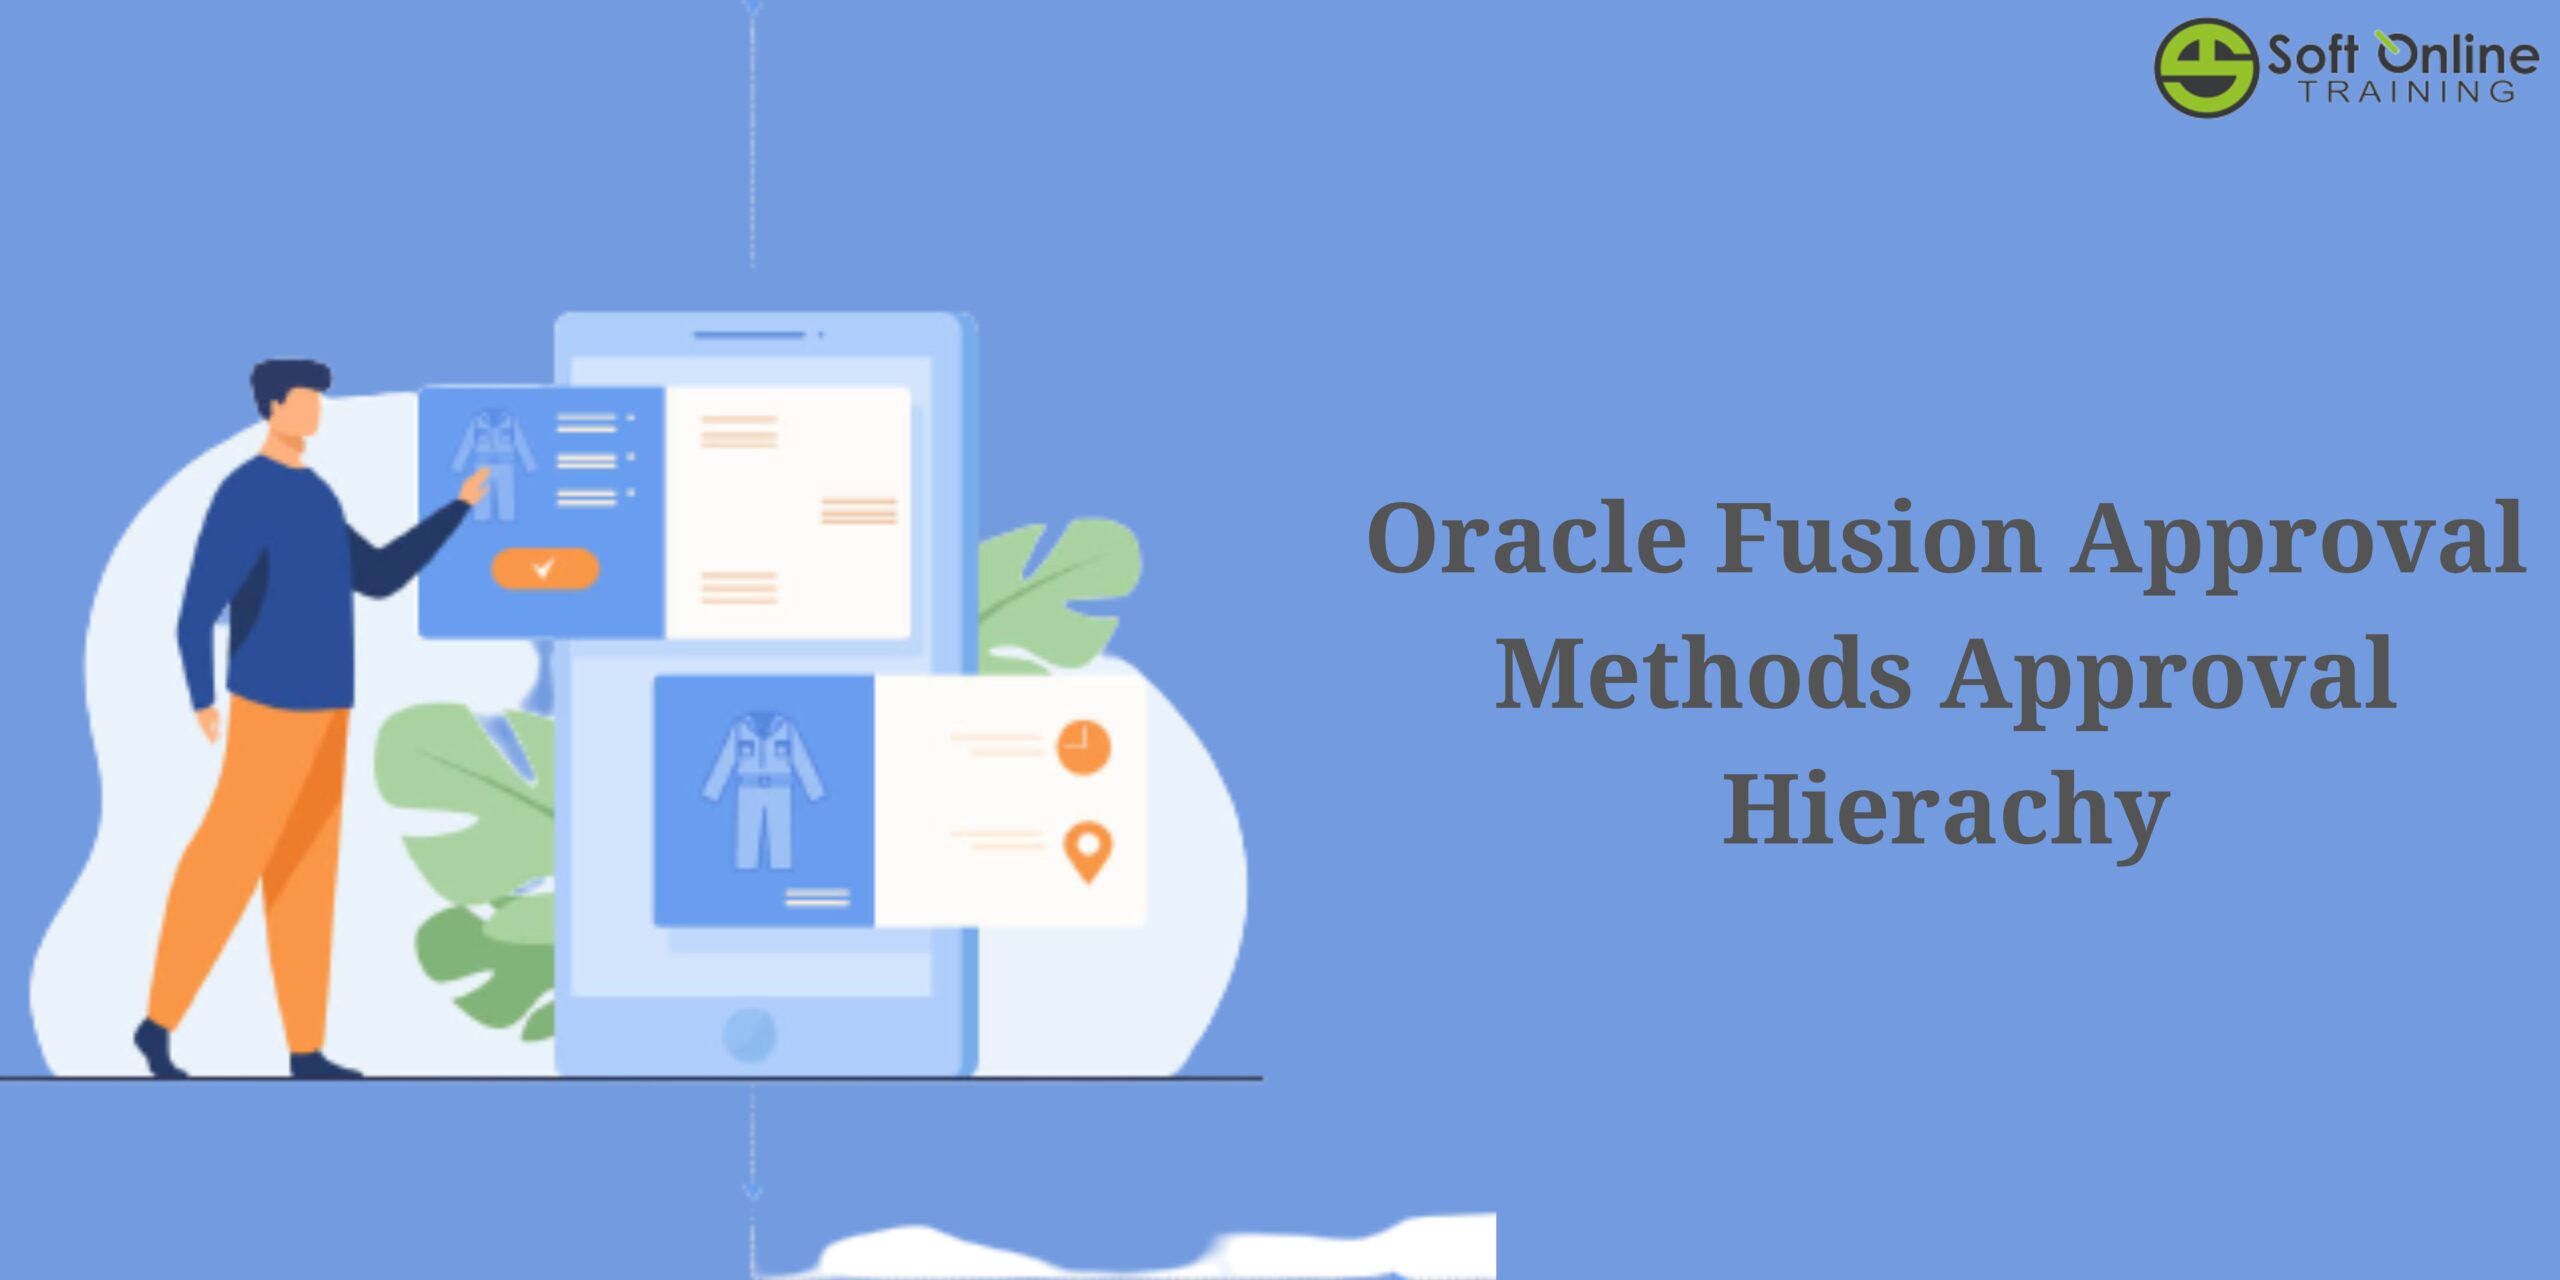 Oracle Fusion Approval Methods Approval Hierachy